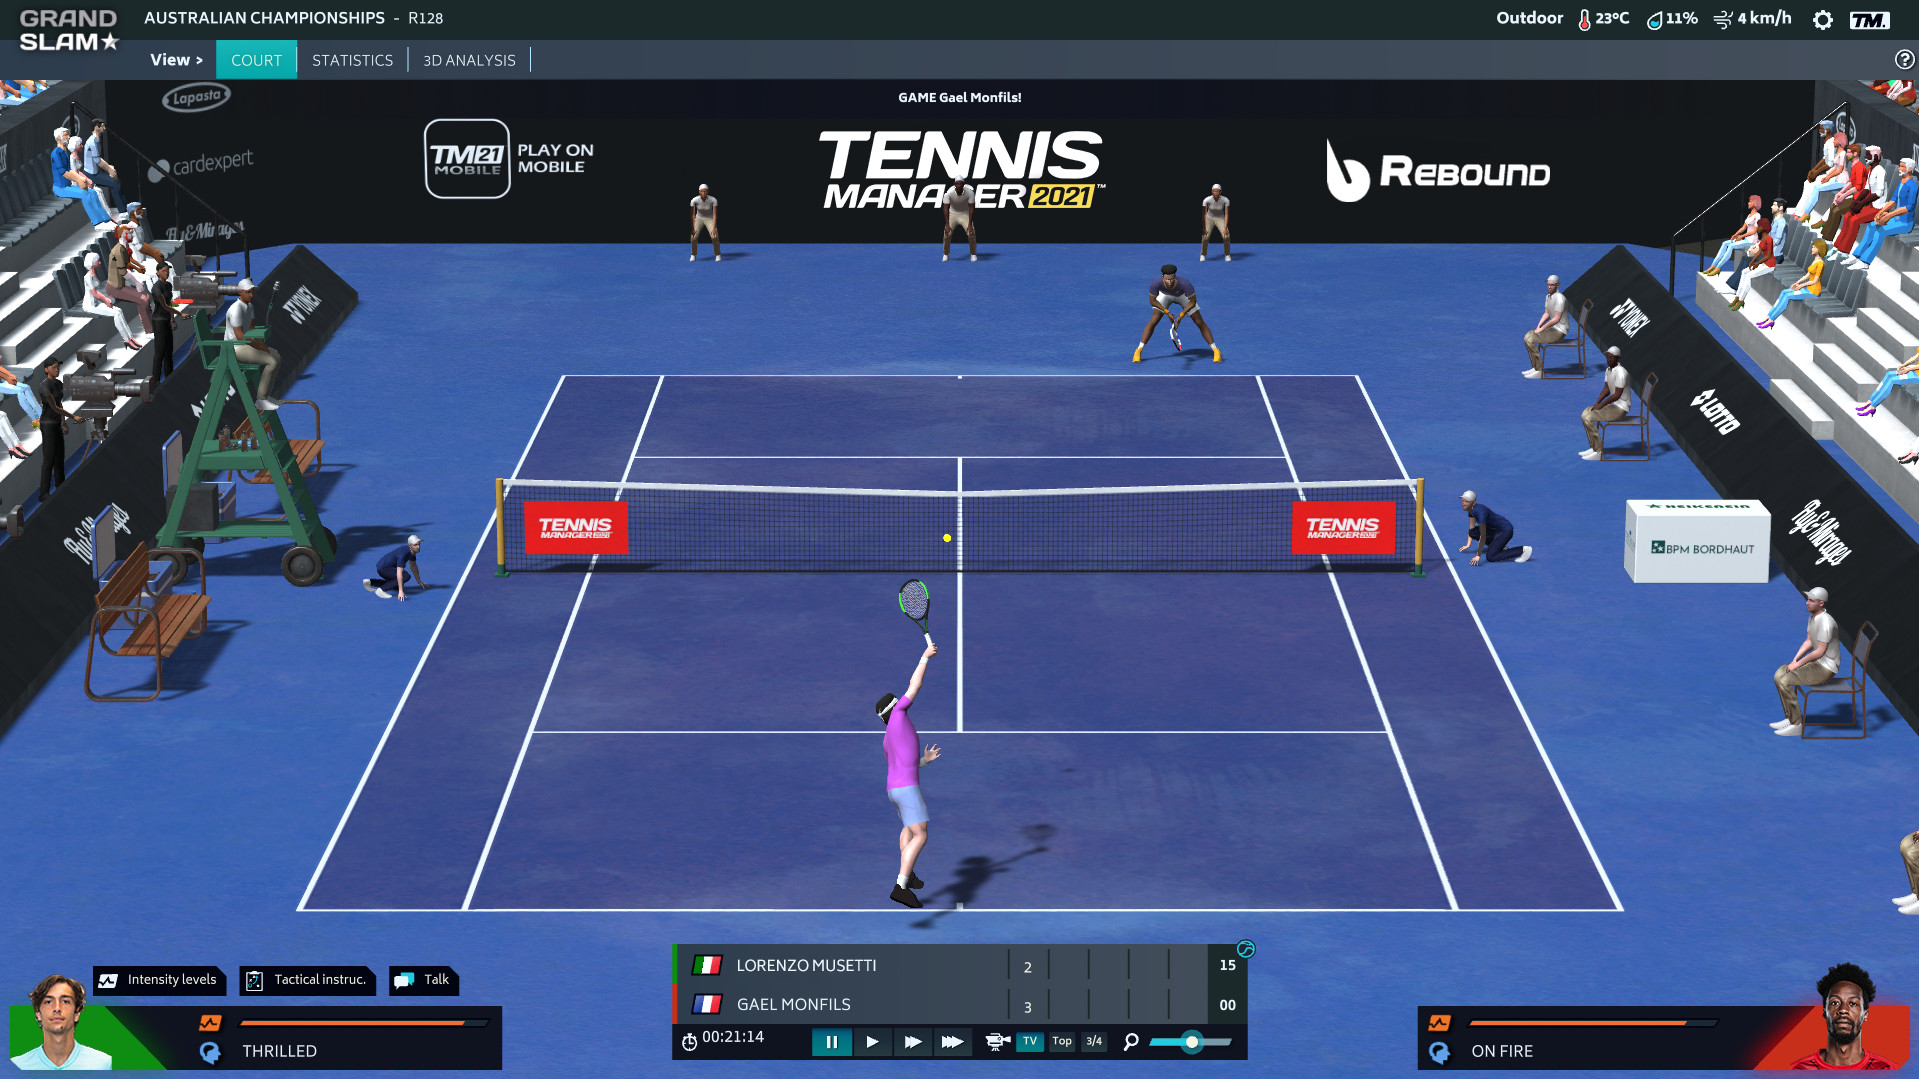 Tennis Manager 2021 Steam CD Key [USD 2.86]